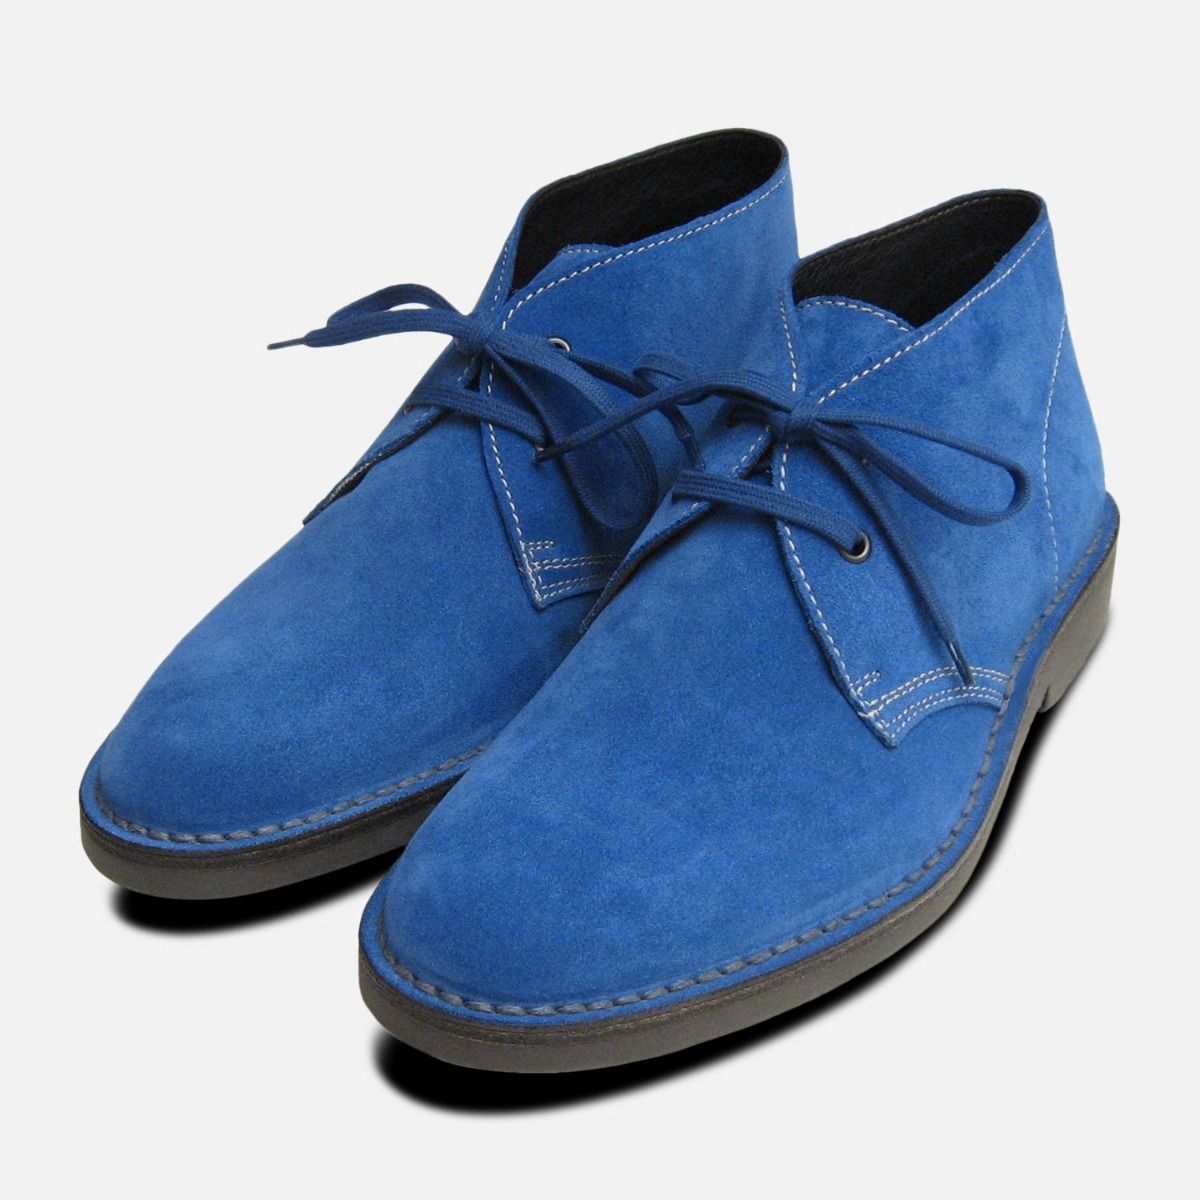 Santoni Ankle Boots in Dark Blue Mens Shoes Boots Chukka boots and desert boots Blue for Men 